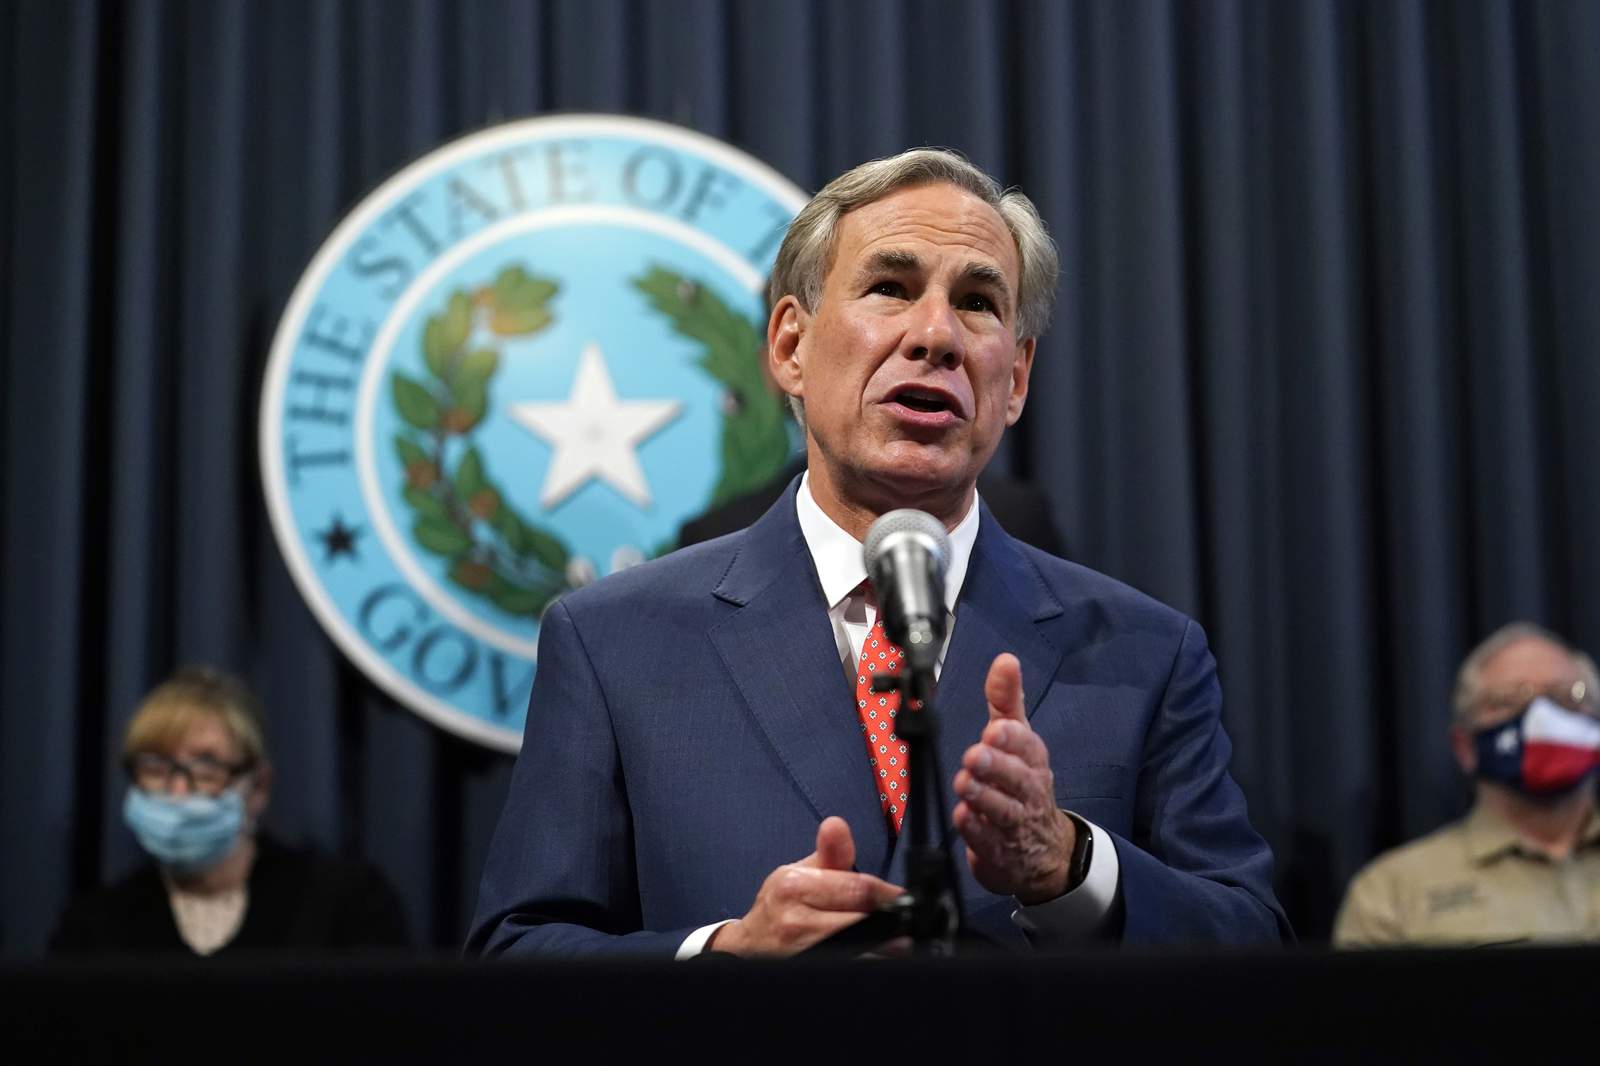 Texas governor gives OK for bars to begin reopening